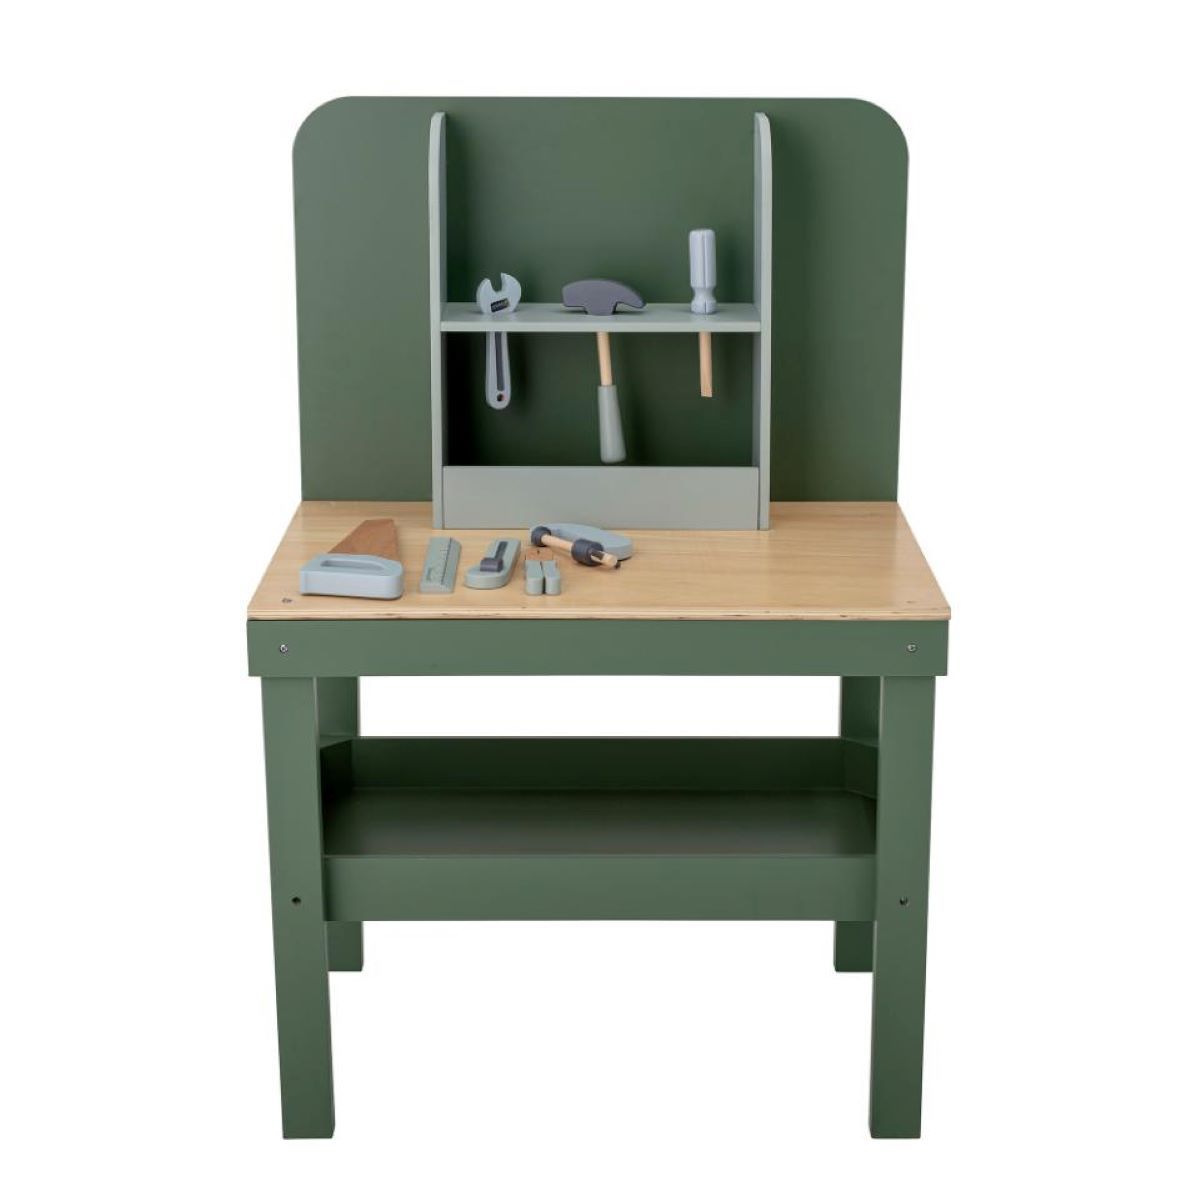 Bloomingville - Bubba Wooden Toy Workbench in Green - Scandibørn